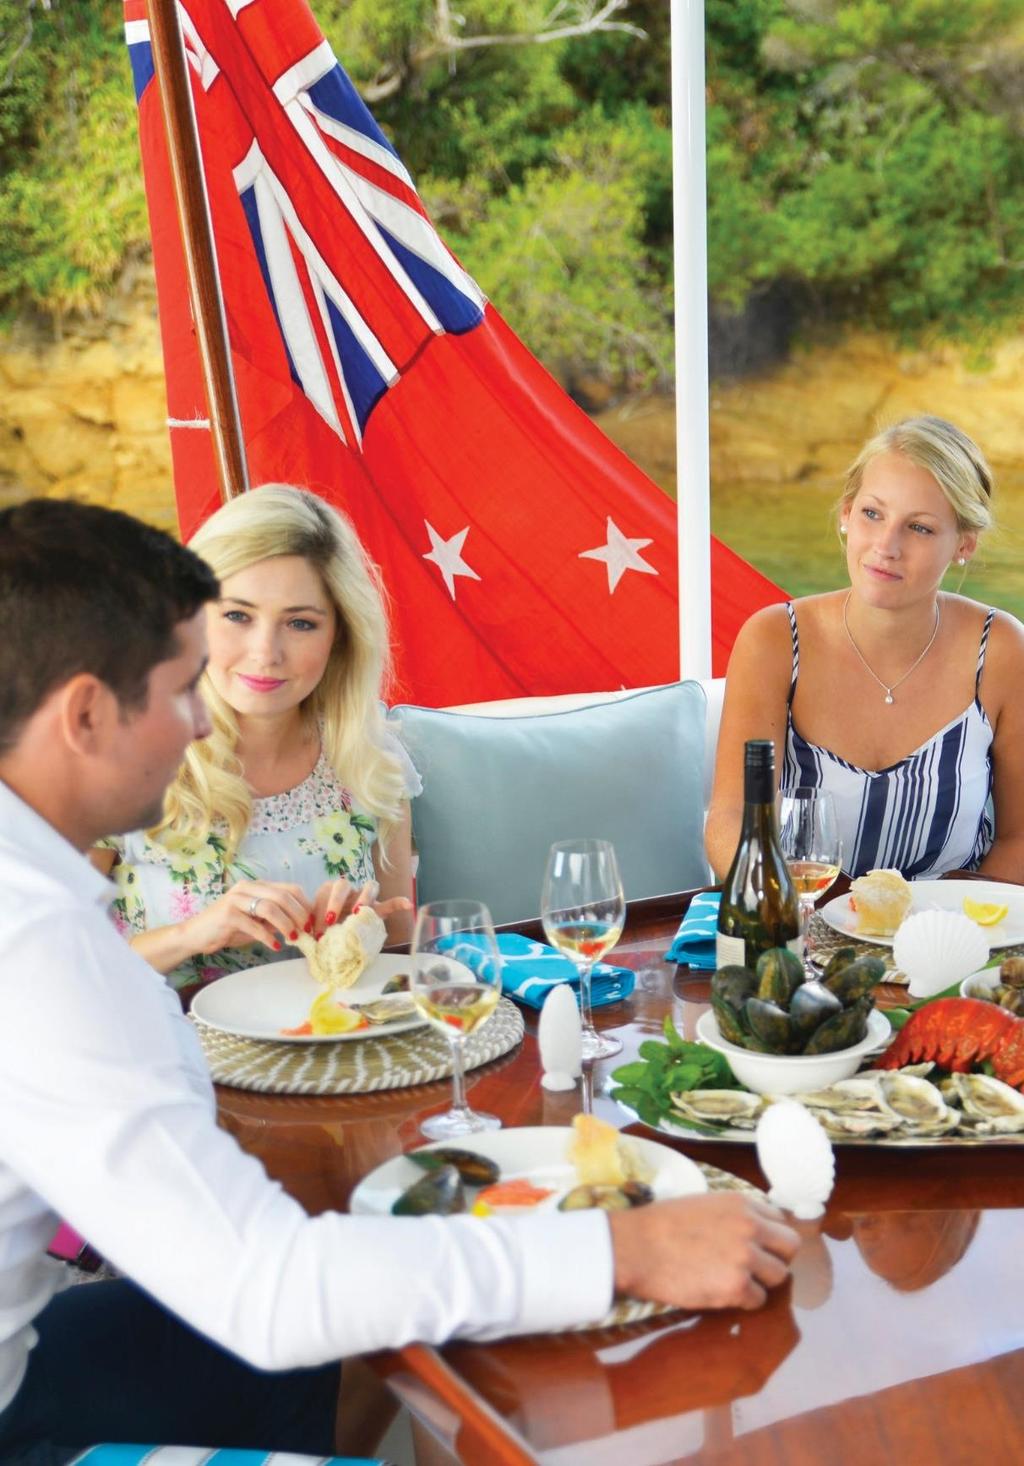 MEALS AND BEVERAGES Multi-night cruise packages include: Evening drinks and canapes followed by a 3-course dinner menu, choice of continental and cooked breakfast, morning and afternoon tea, and